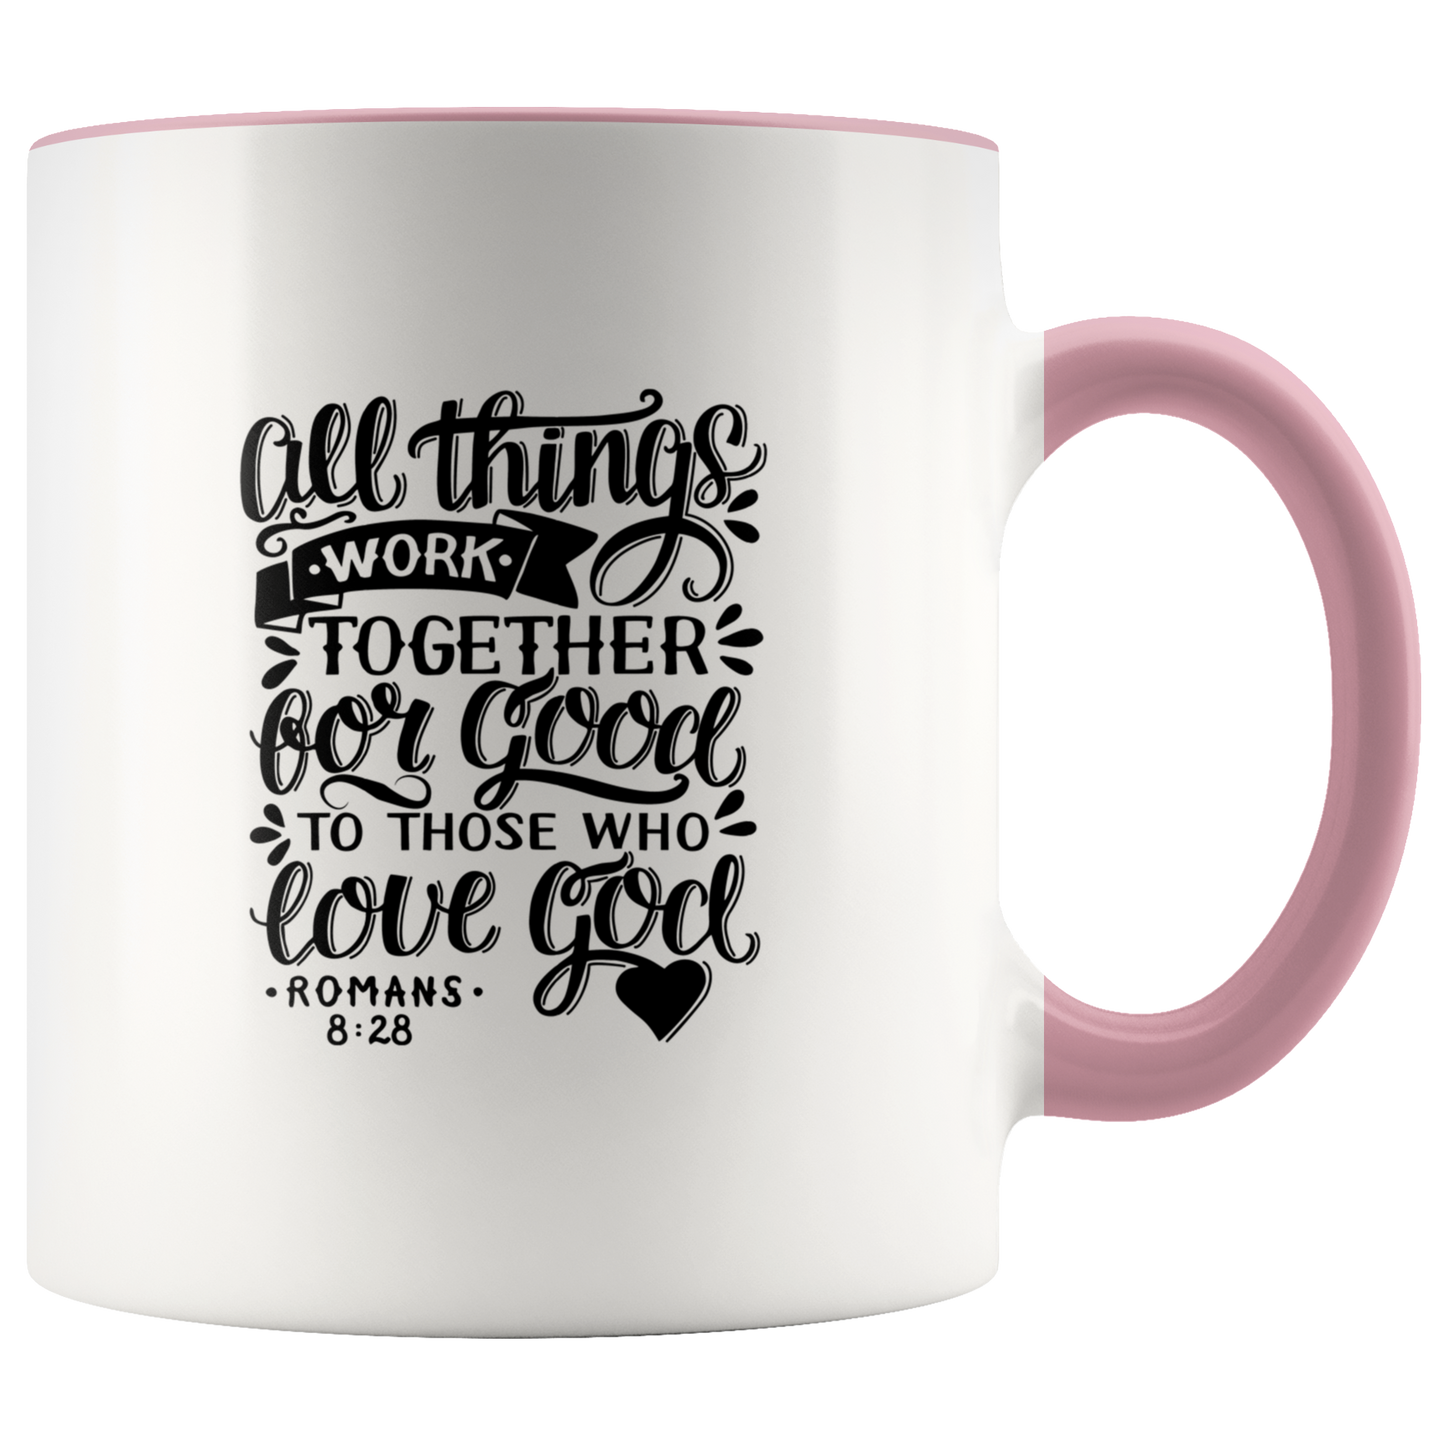 All Things Work Together For Good To Those Who Love God, Romans 8:28 - Accent Mug light pink